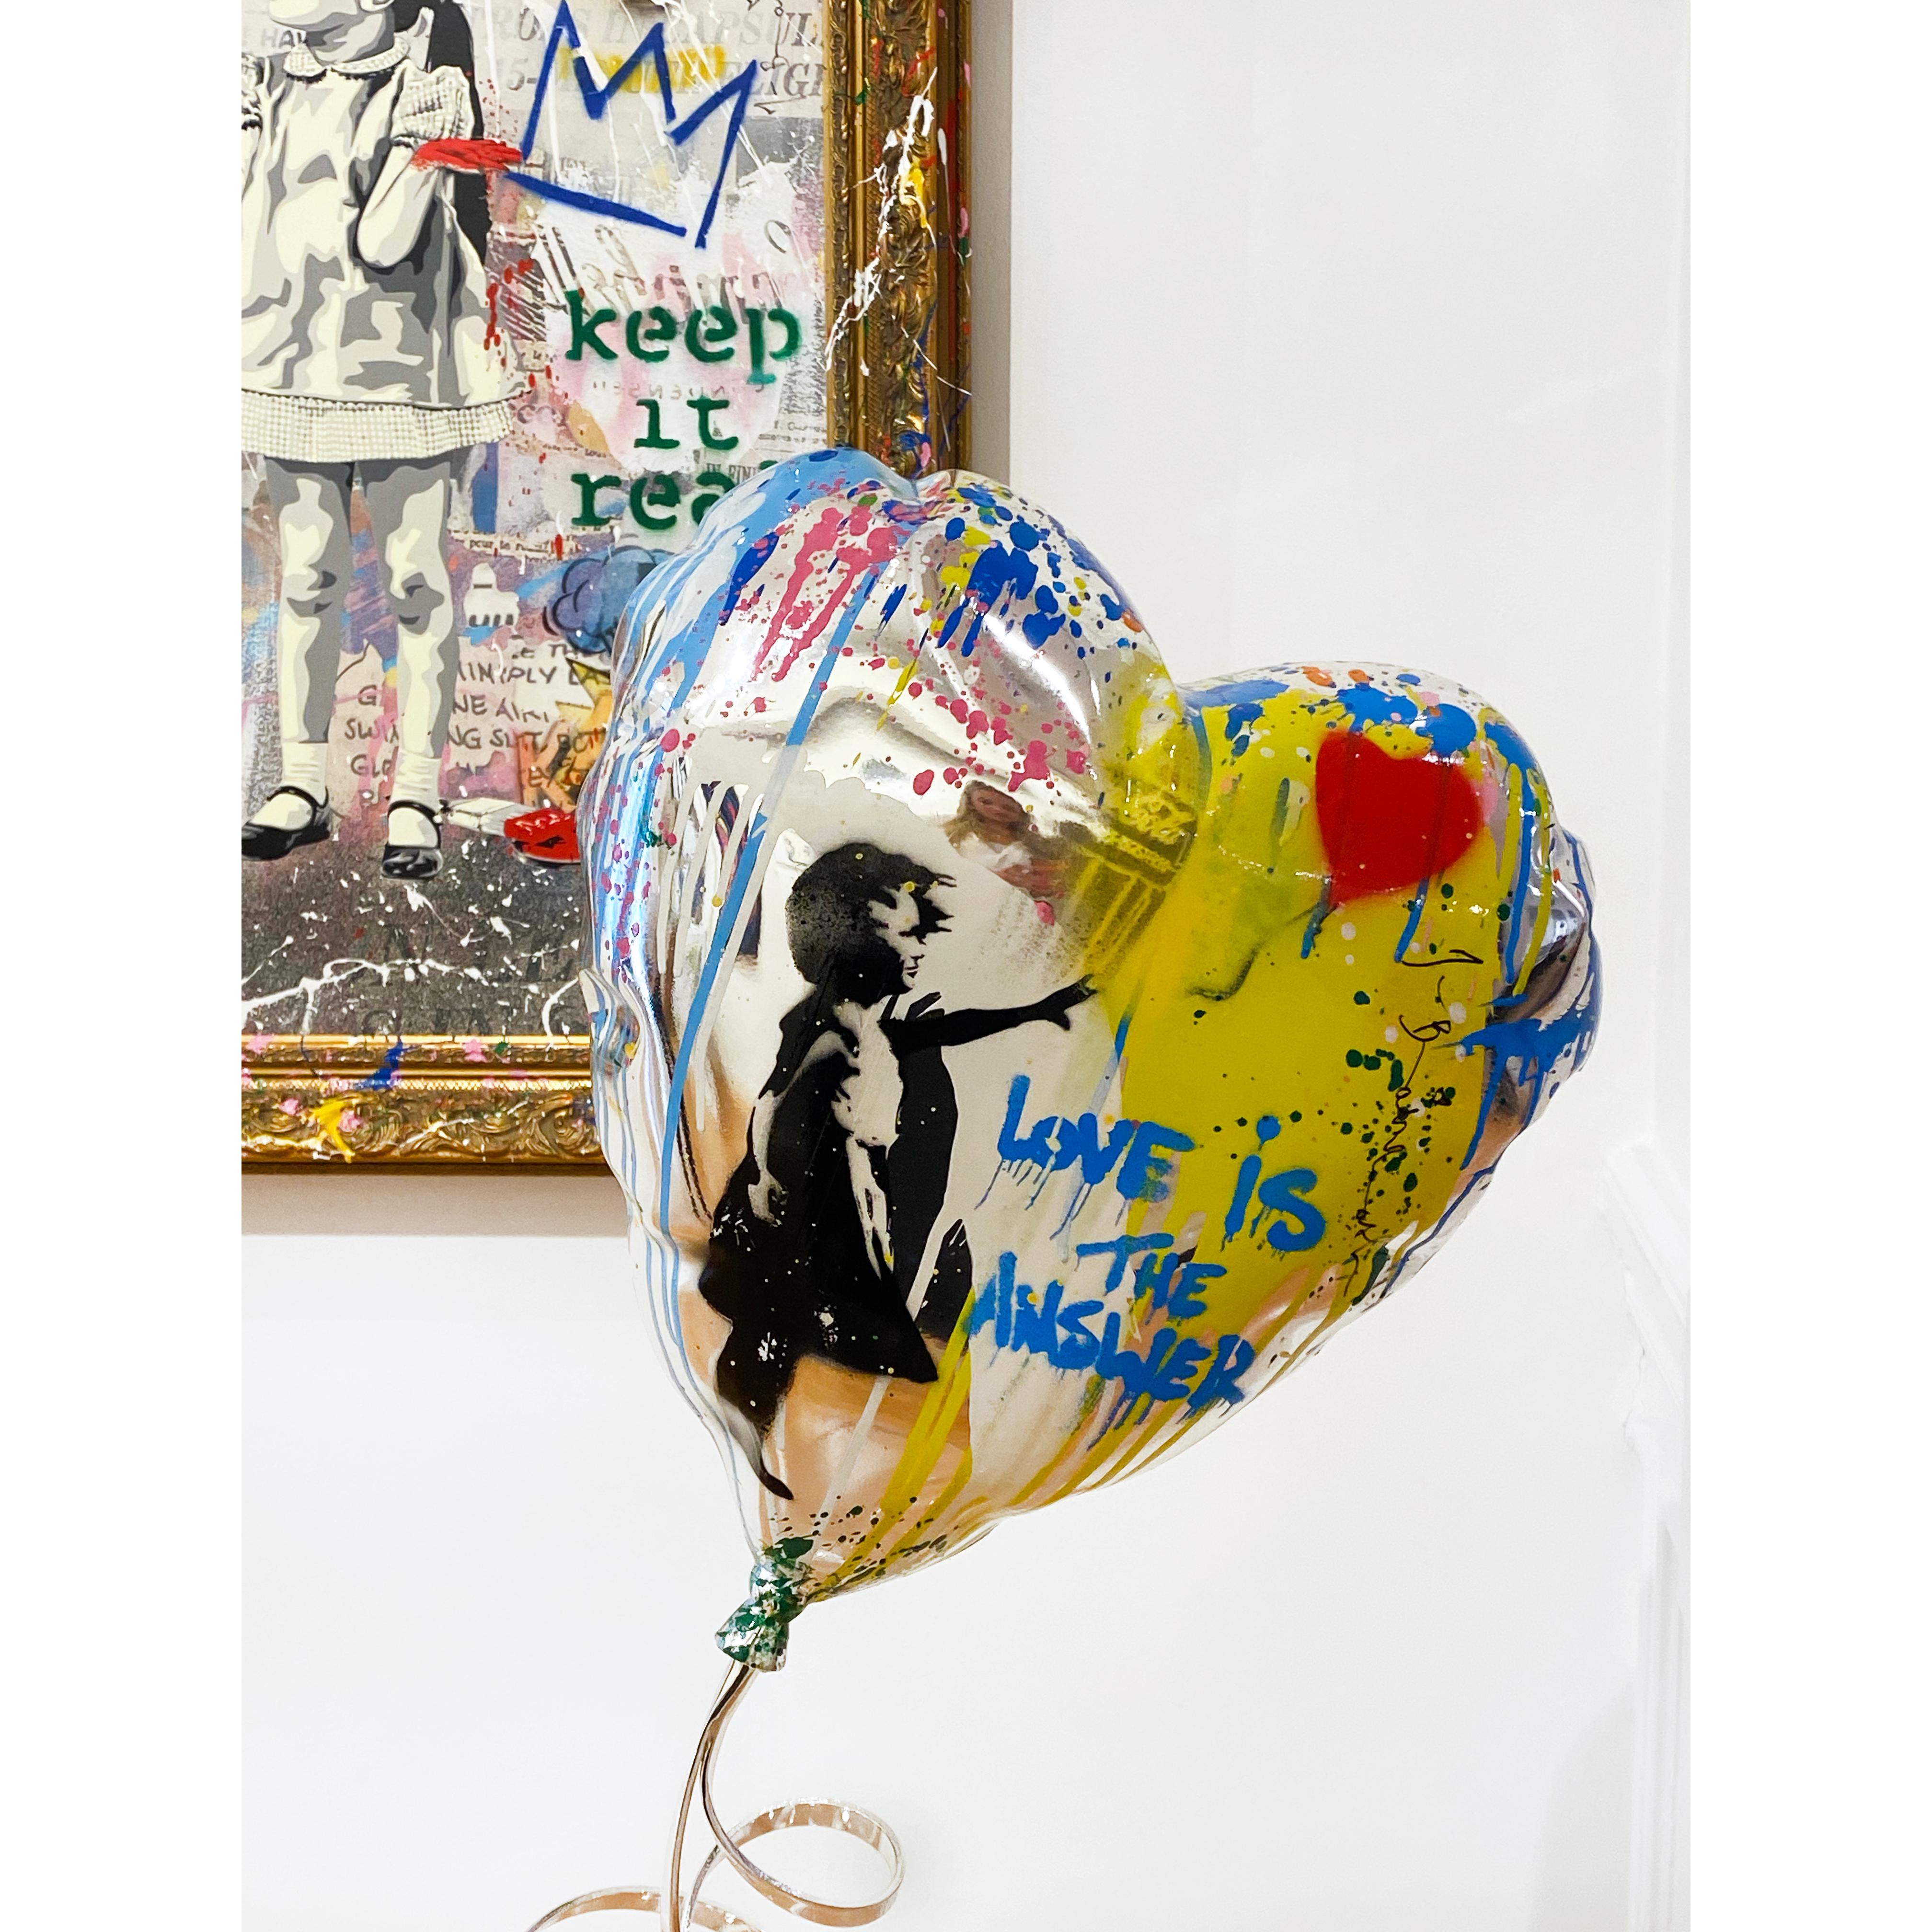 Artist:  Brainwash, Mr.
Title:  Flying Balloon Heart
Date:  2023
Medium:  Stencil and Mixed Media on Fiberglass and acrylic base
Unframed Dimensions:  32